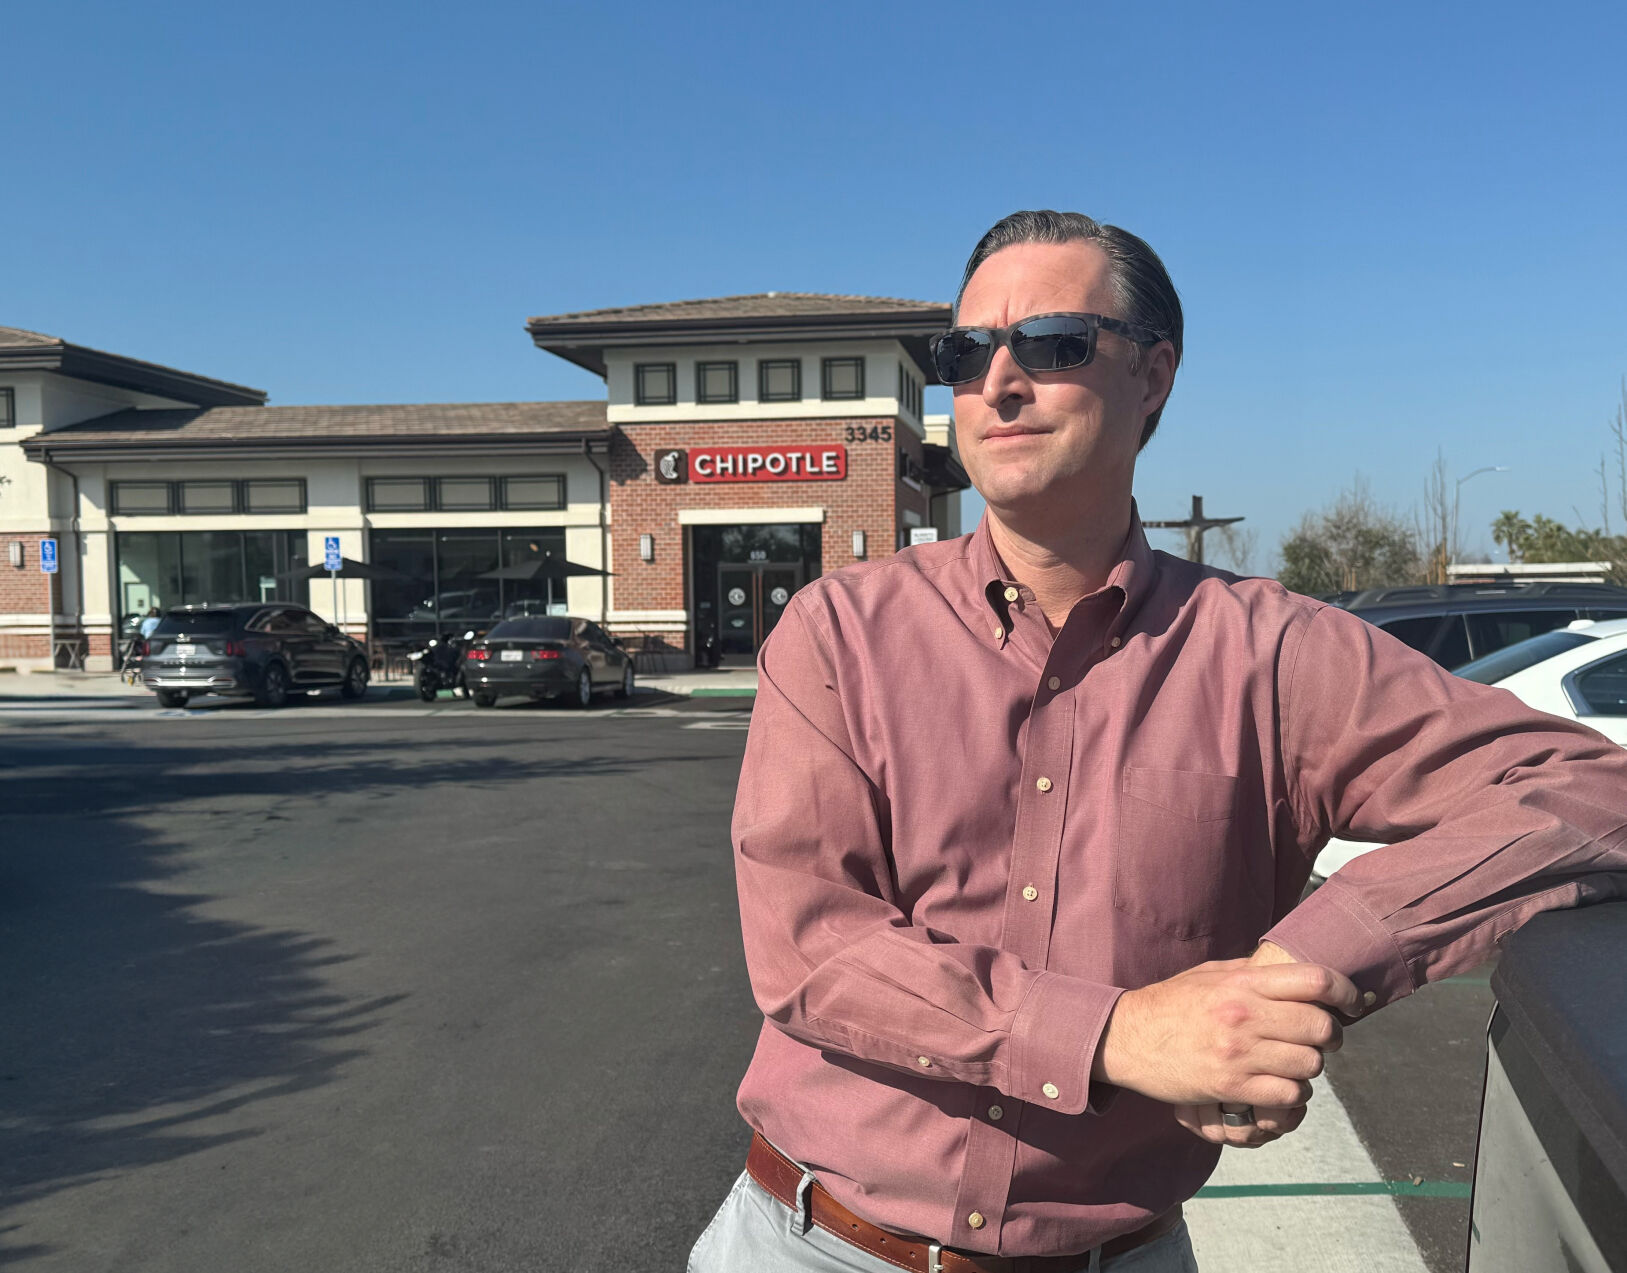 bakersfield.com - BY JOHN COX
jcox@bakersfield.com - New stores on the way - assuming developers find loans